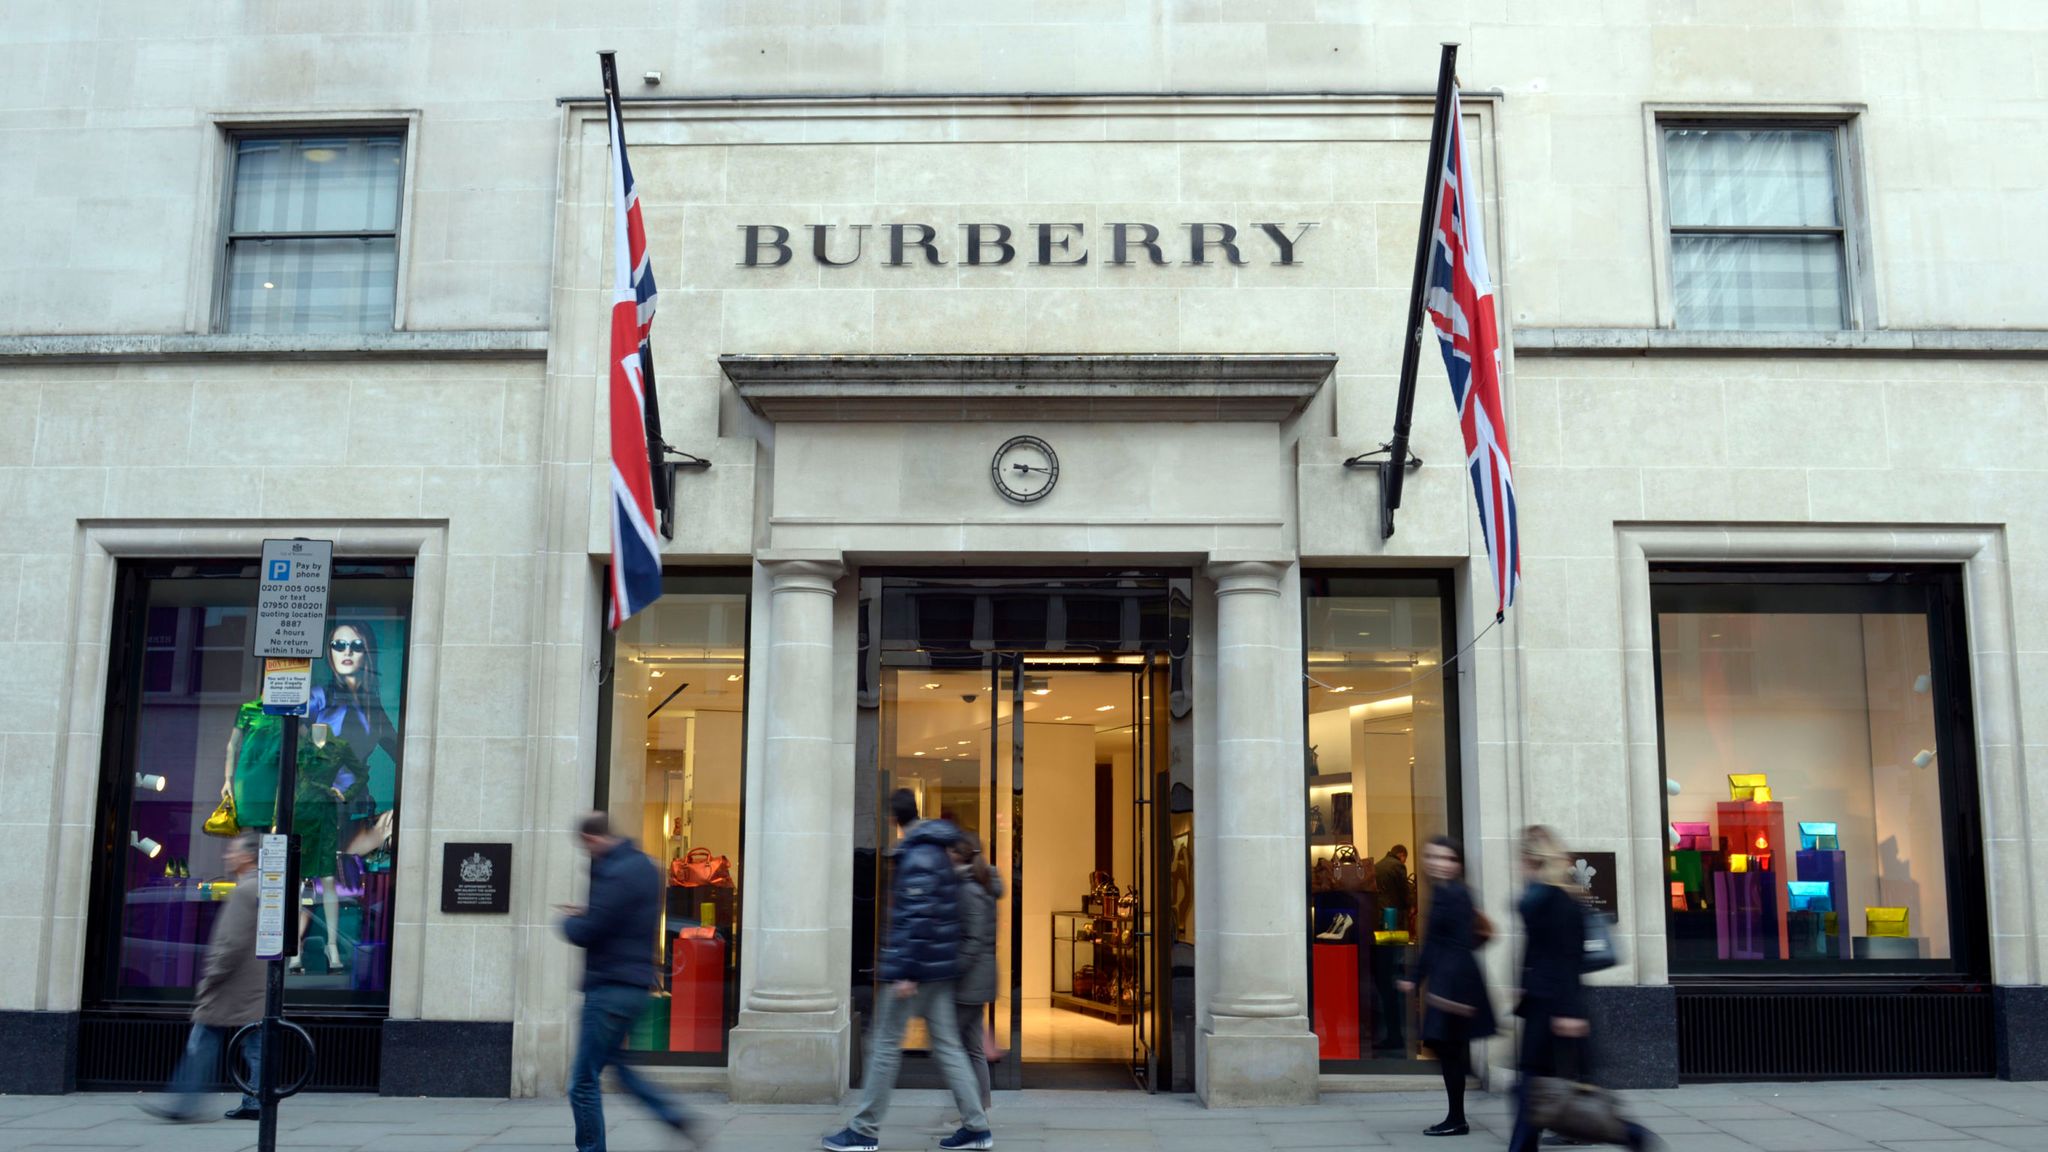 Burberry to shut stores in 'unluxurious' areas | Business News | Sky News